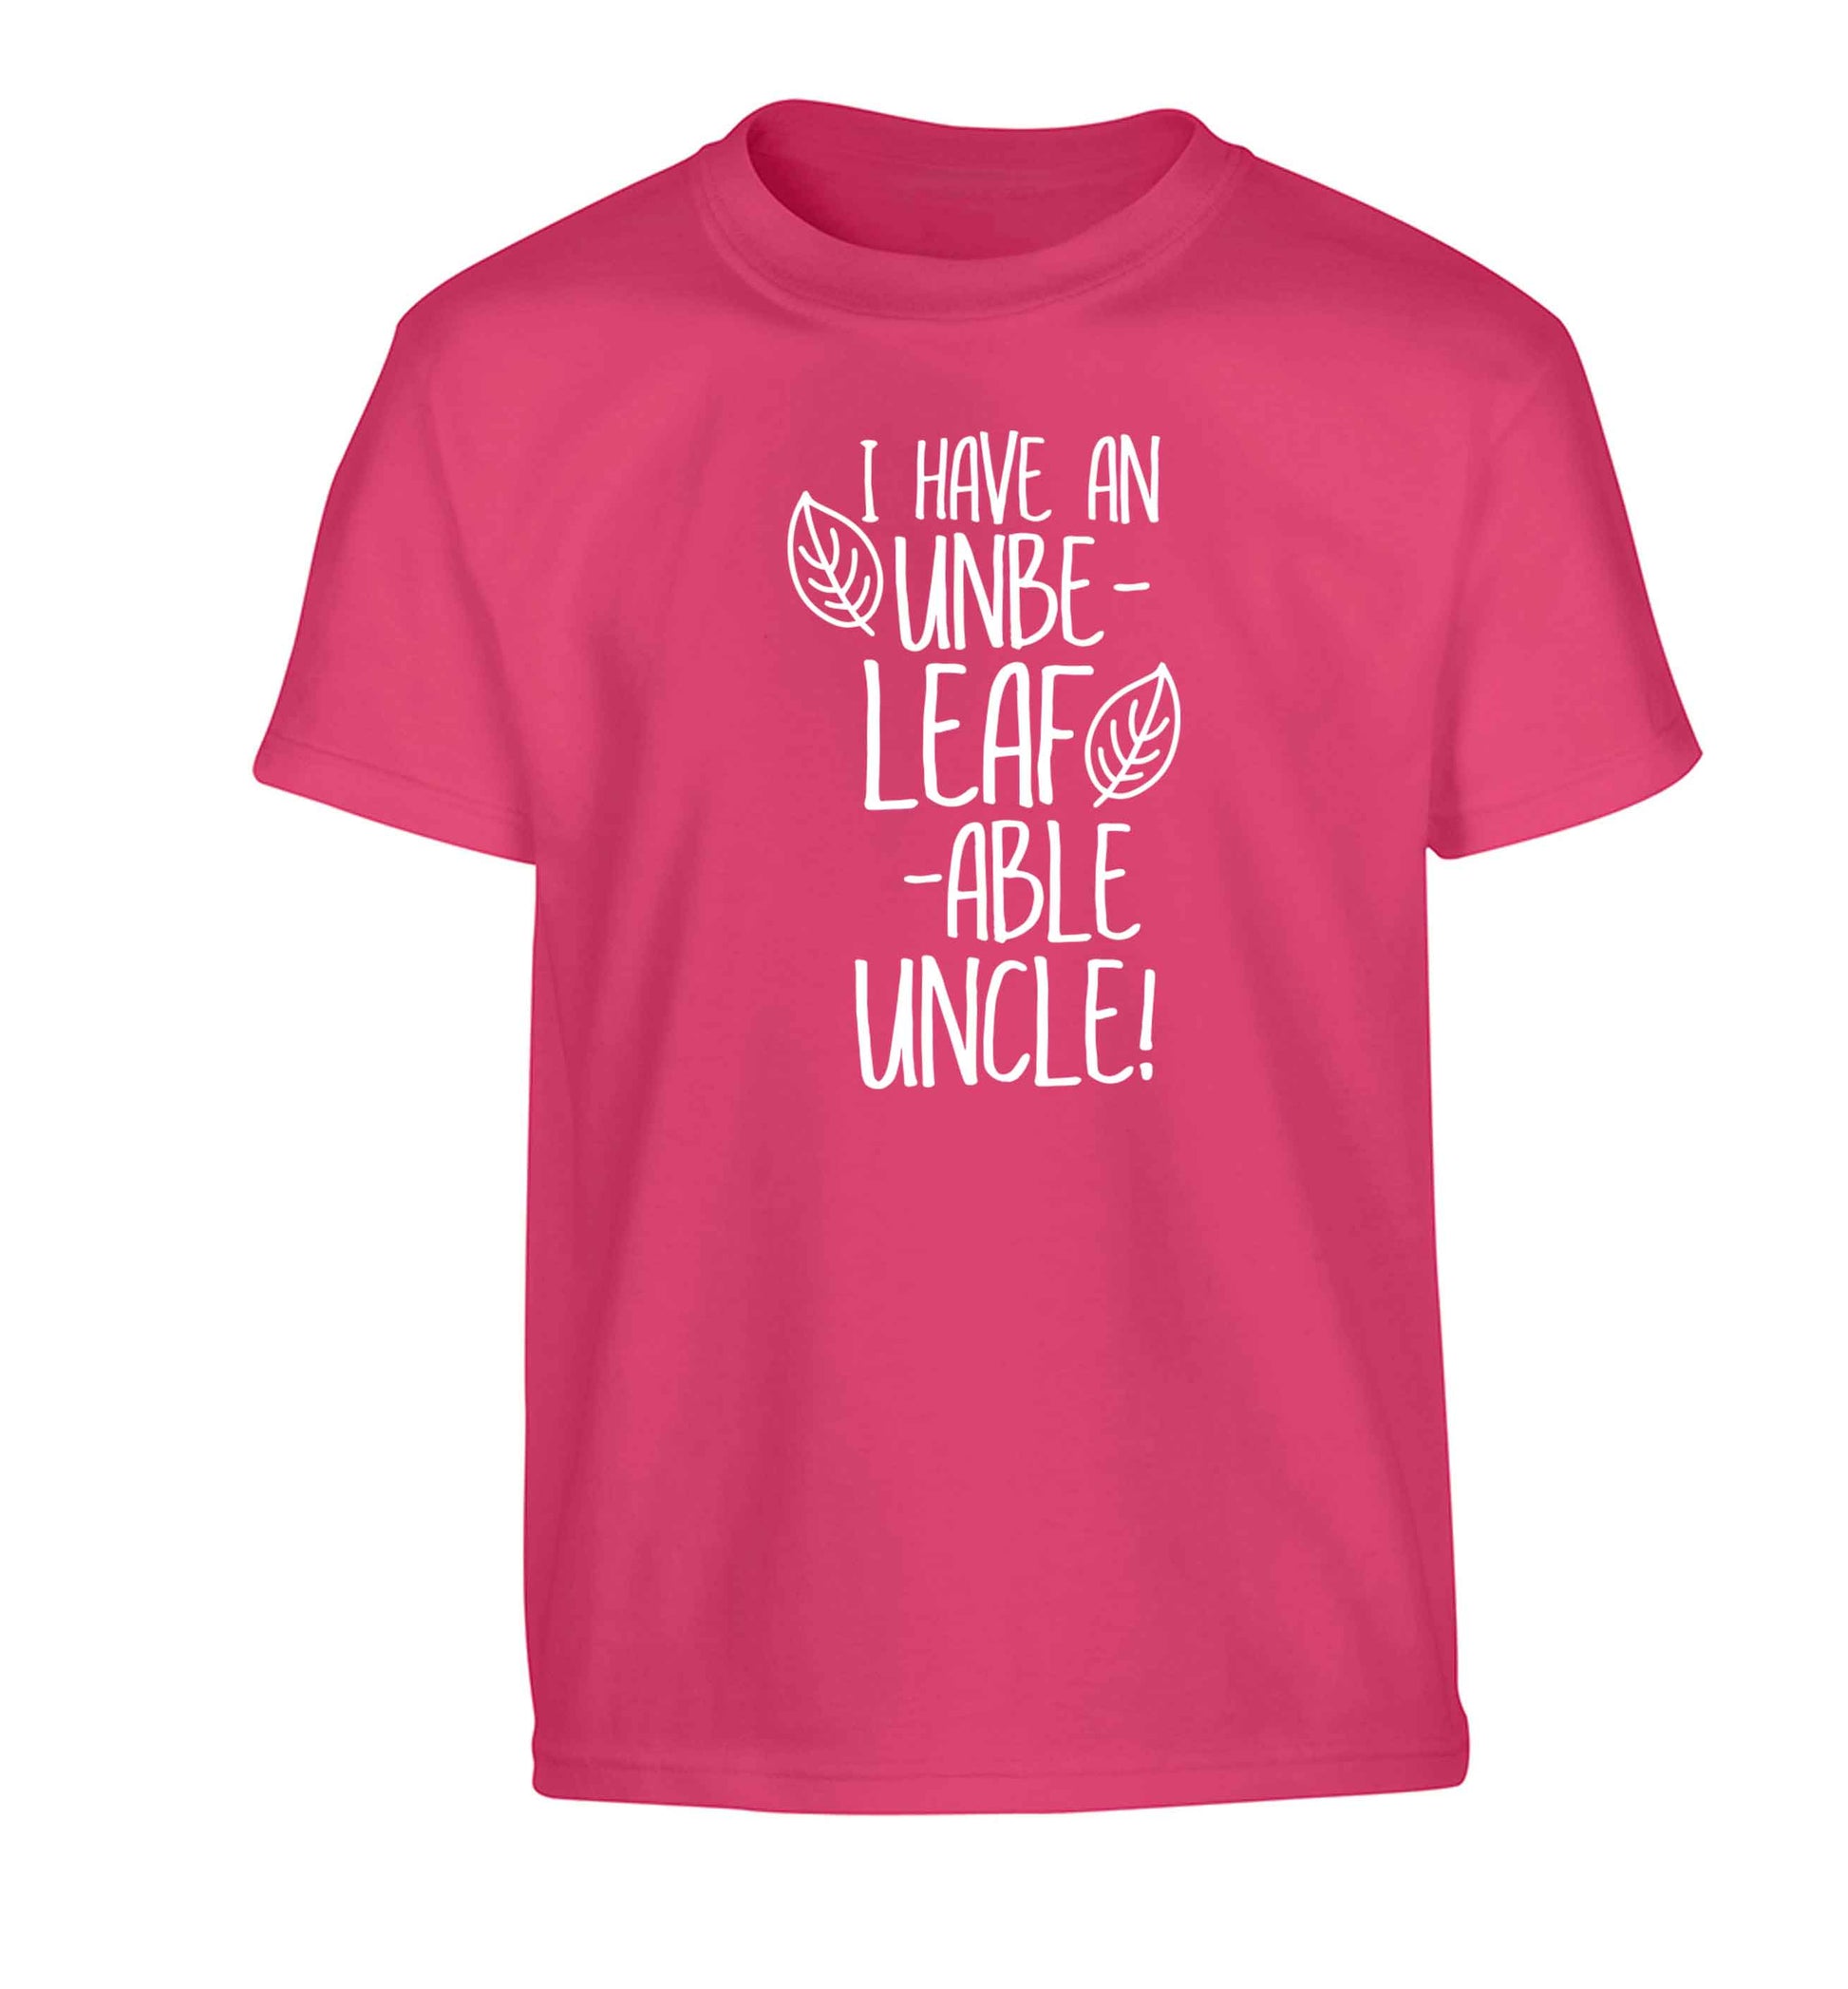 I have an unbe-leaf-able uncle Children's pink Tshirt 12-13 Years